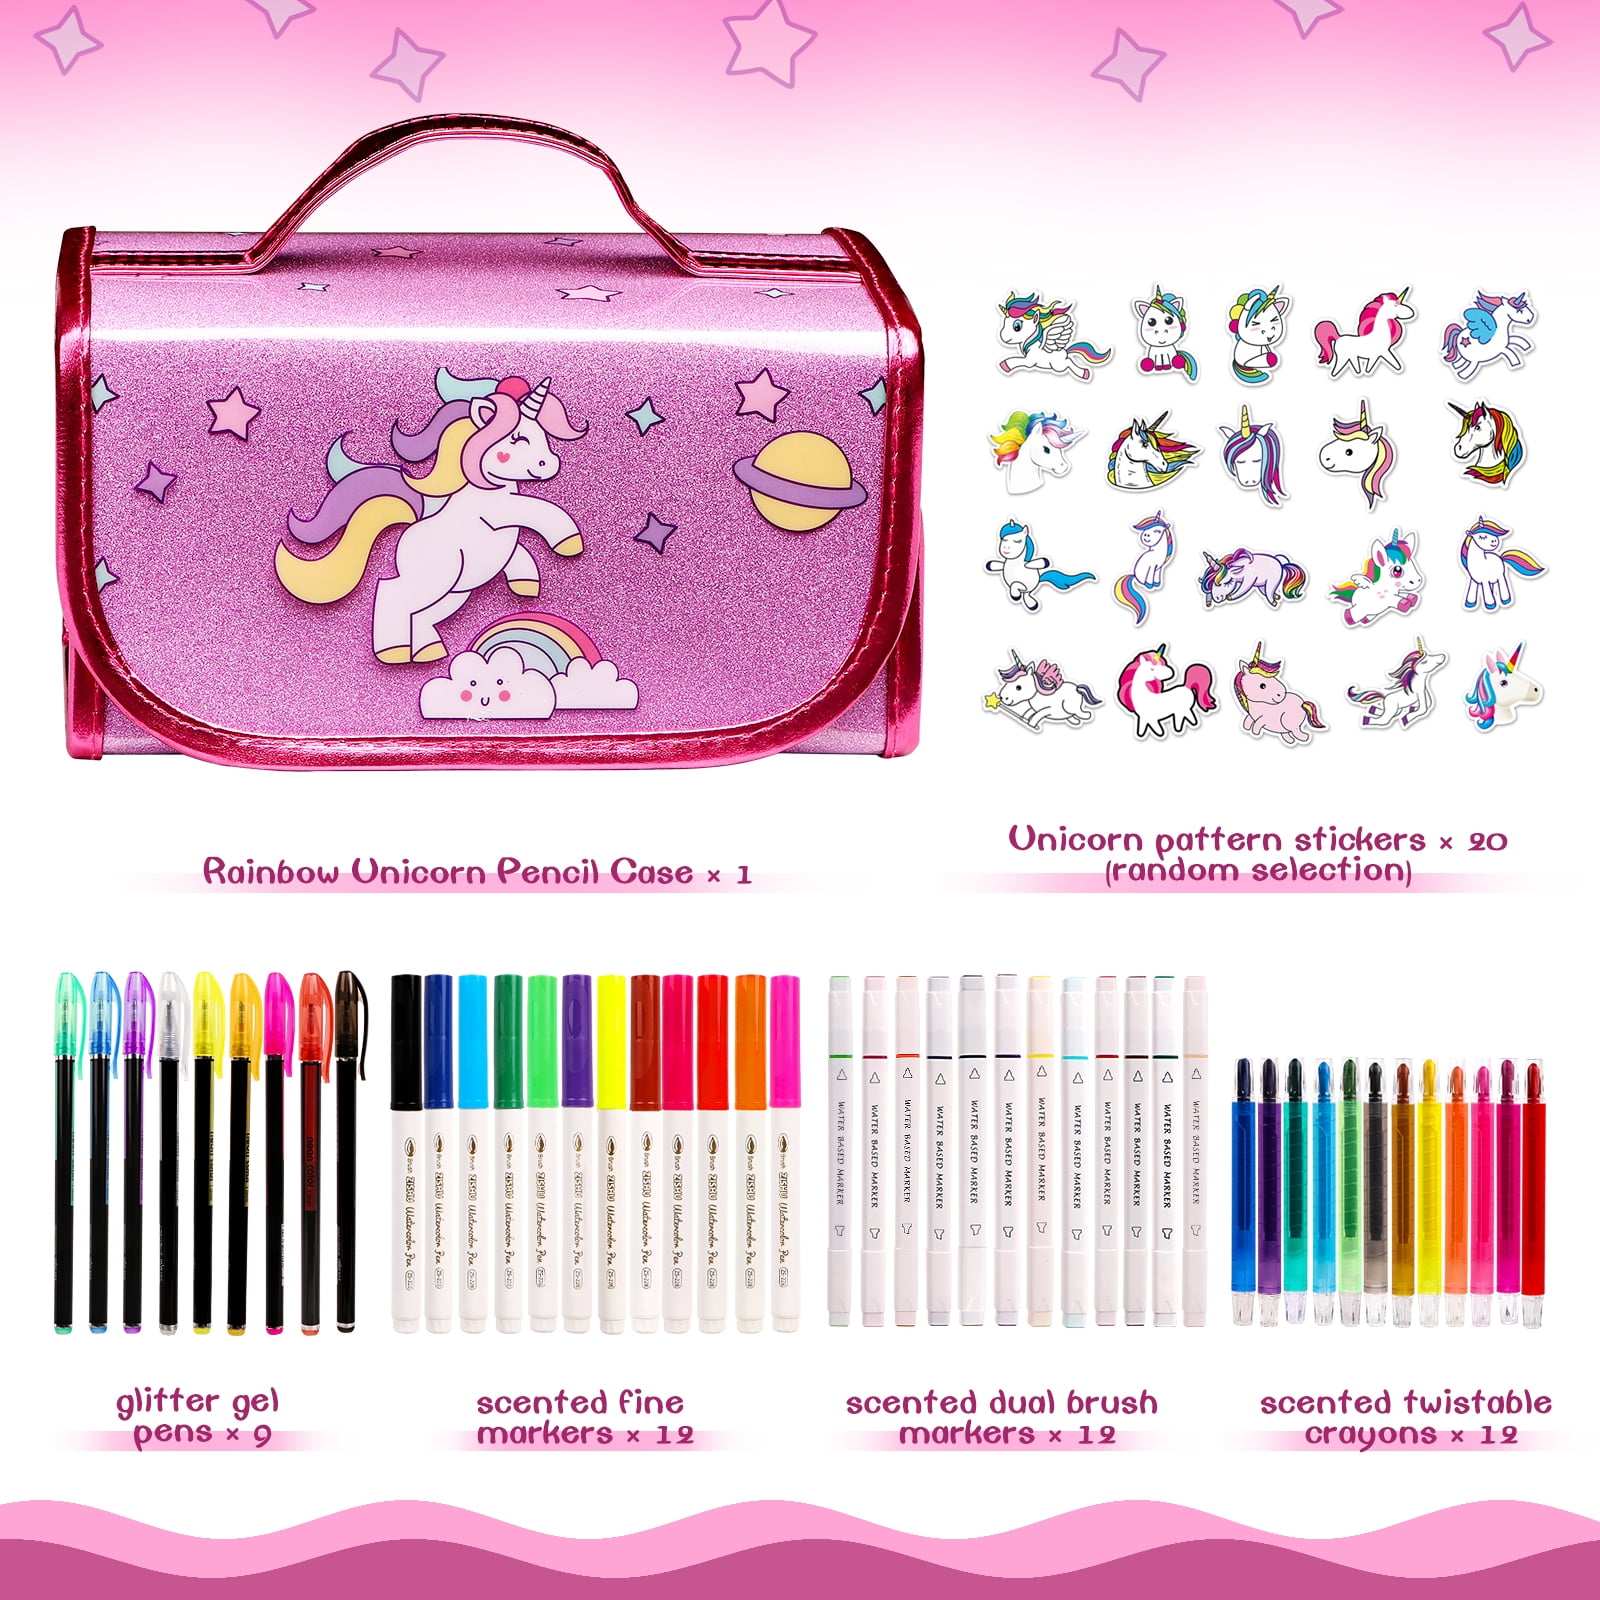 Fruit Scented Markers Set 44 Pcs Filled Stationery with Unicorn Pencil  Case,Art Supplies for Kids Ages 4-6-8, Perfect Unicorn Gifts For